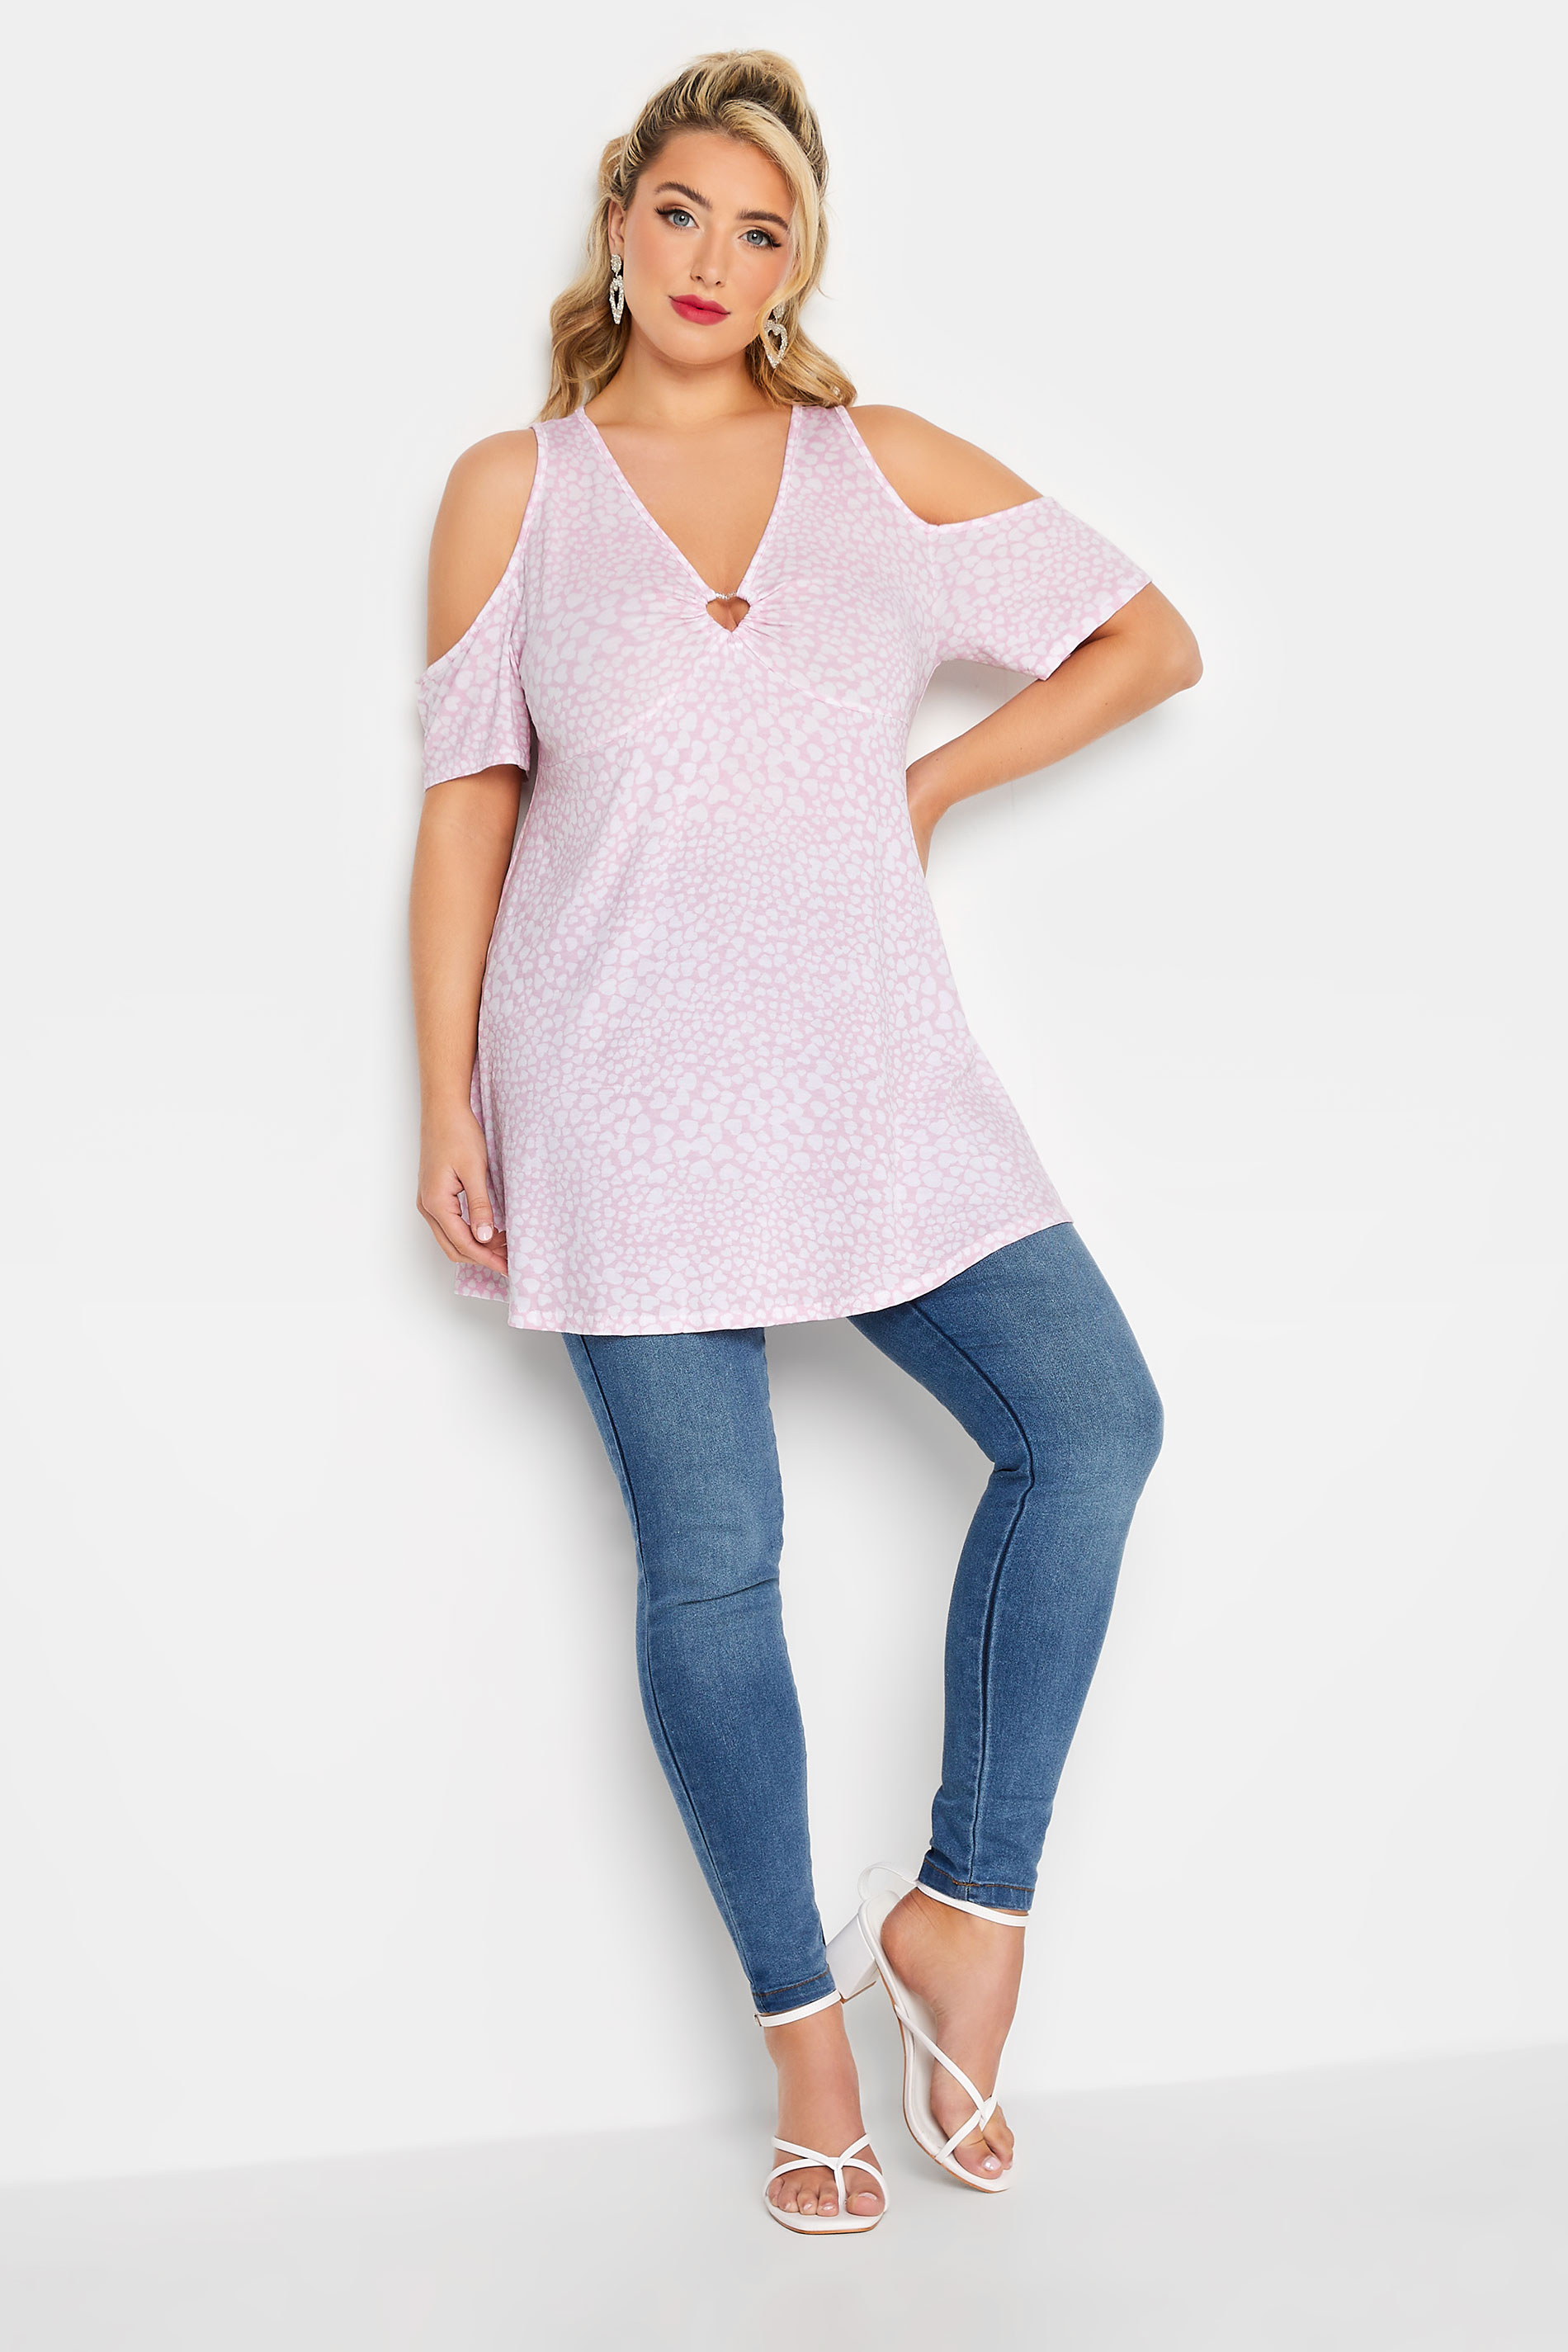 LIMITED COLLECTION Plus Size Curve Pink Heart Print Keyhole Short Sleeve Top | Yours Clothing  2